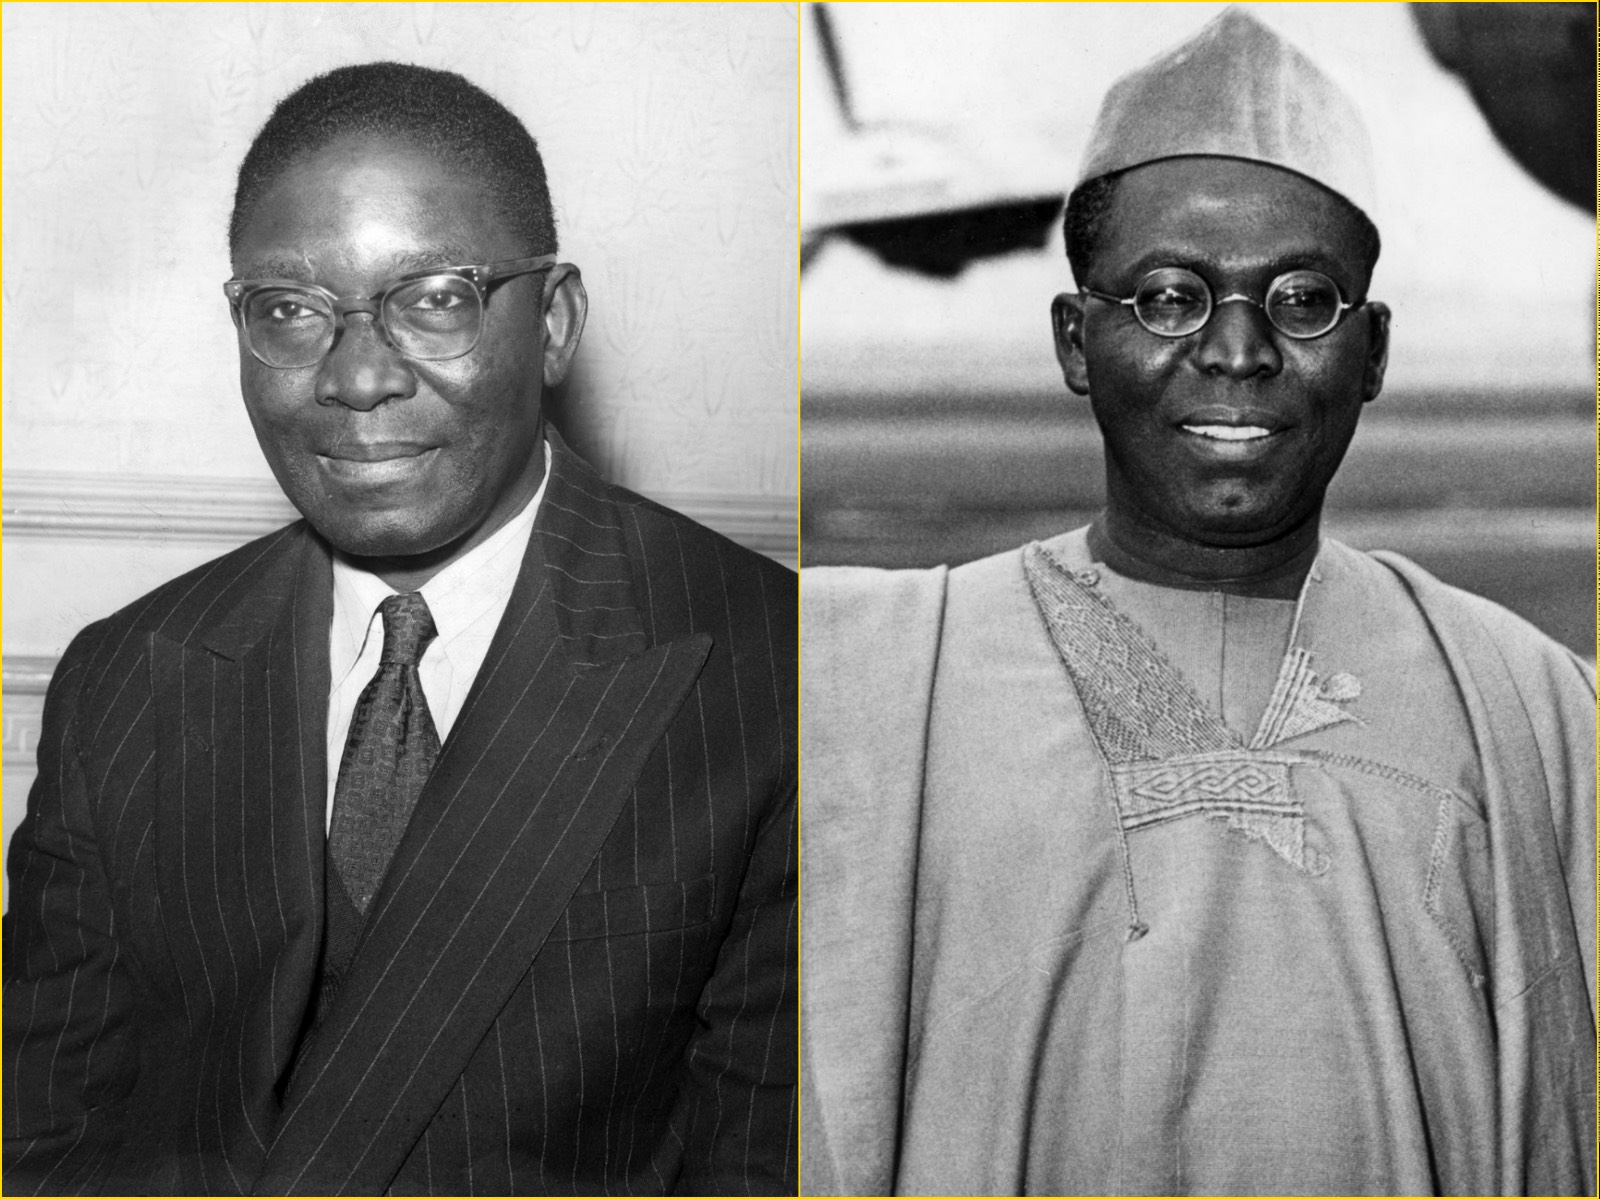 politics unification brothers clash Dr. Nnamdi Azikiwe and Chief Obafemi Awolowo (right) Southern